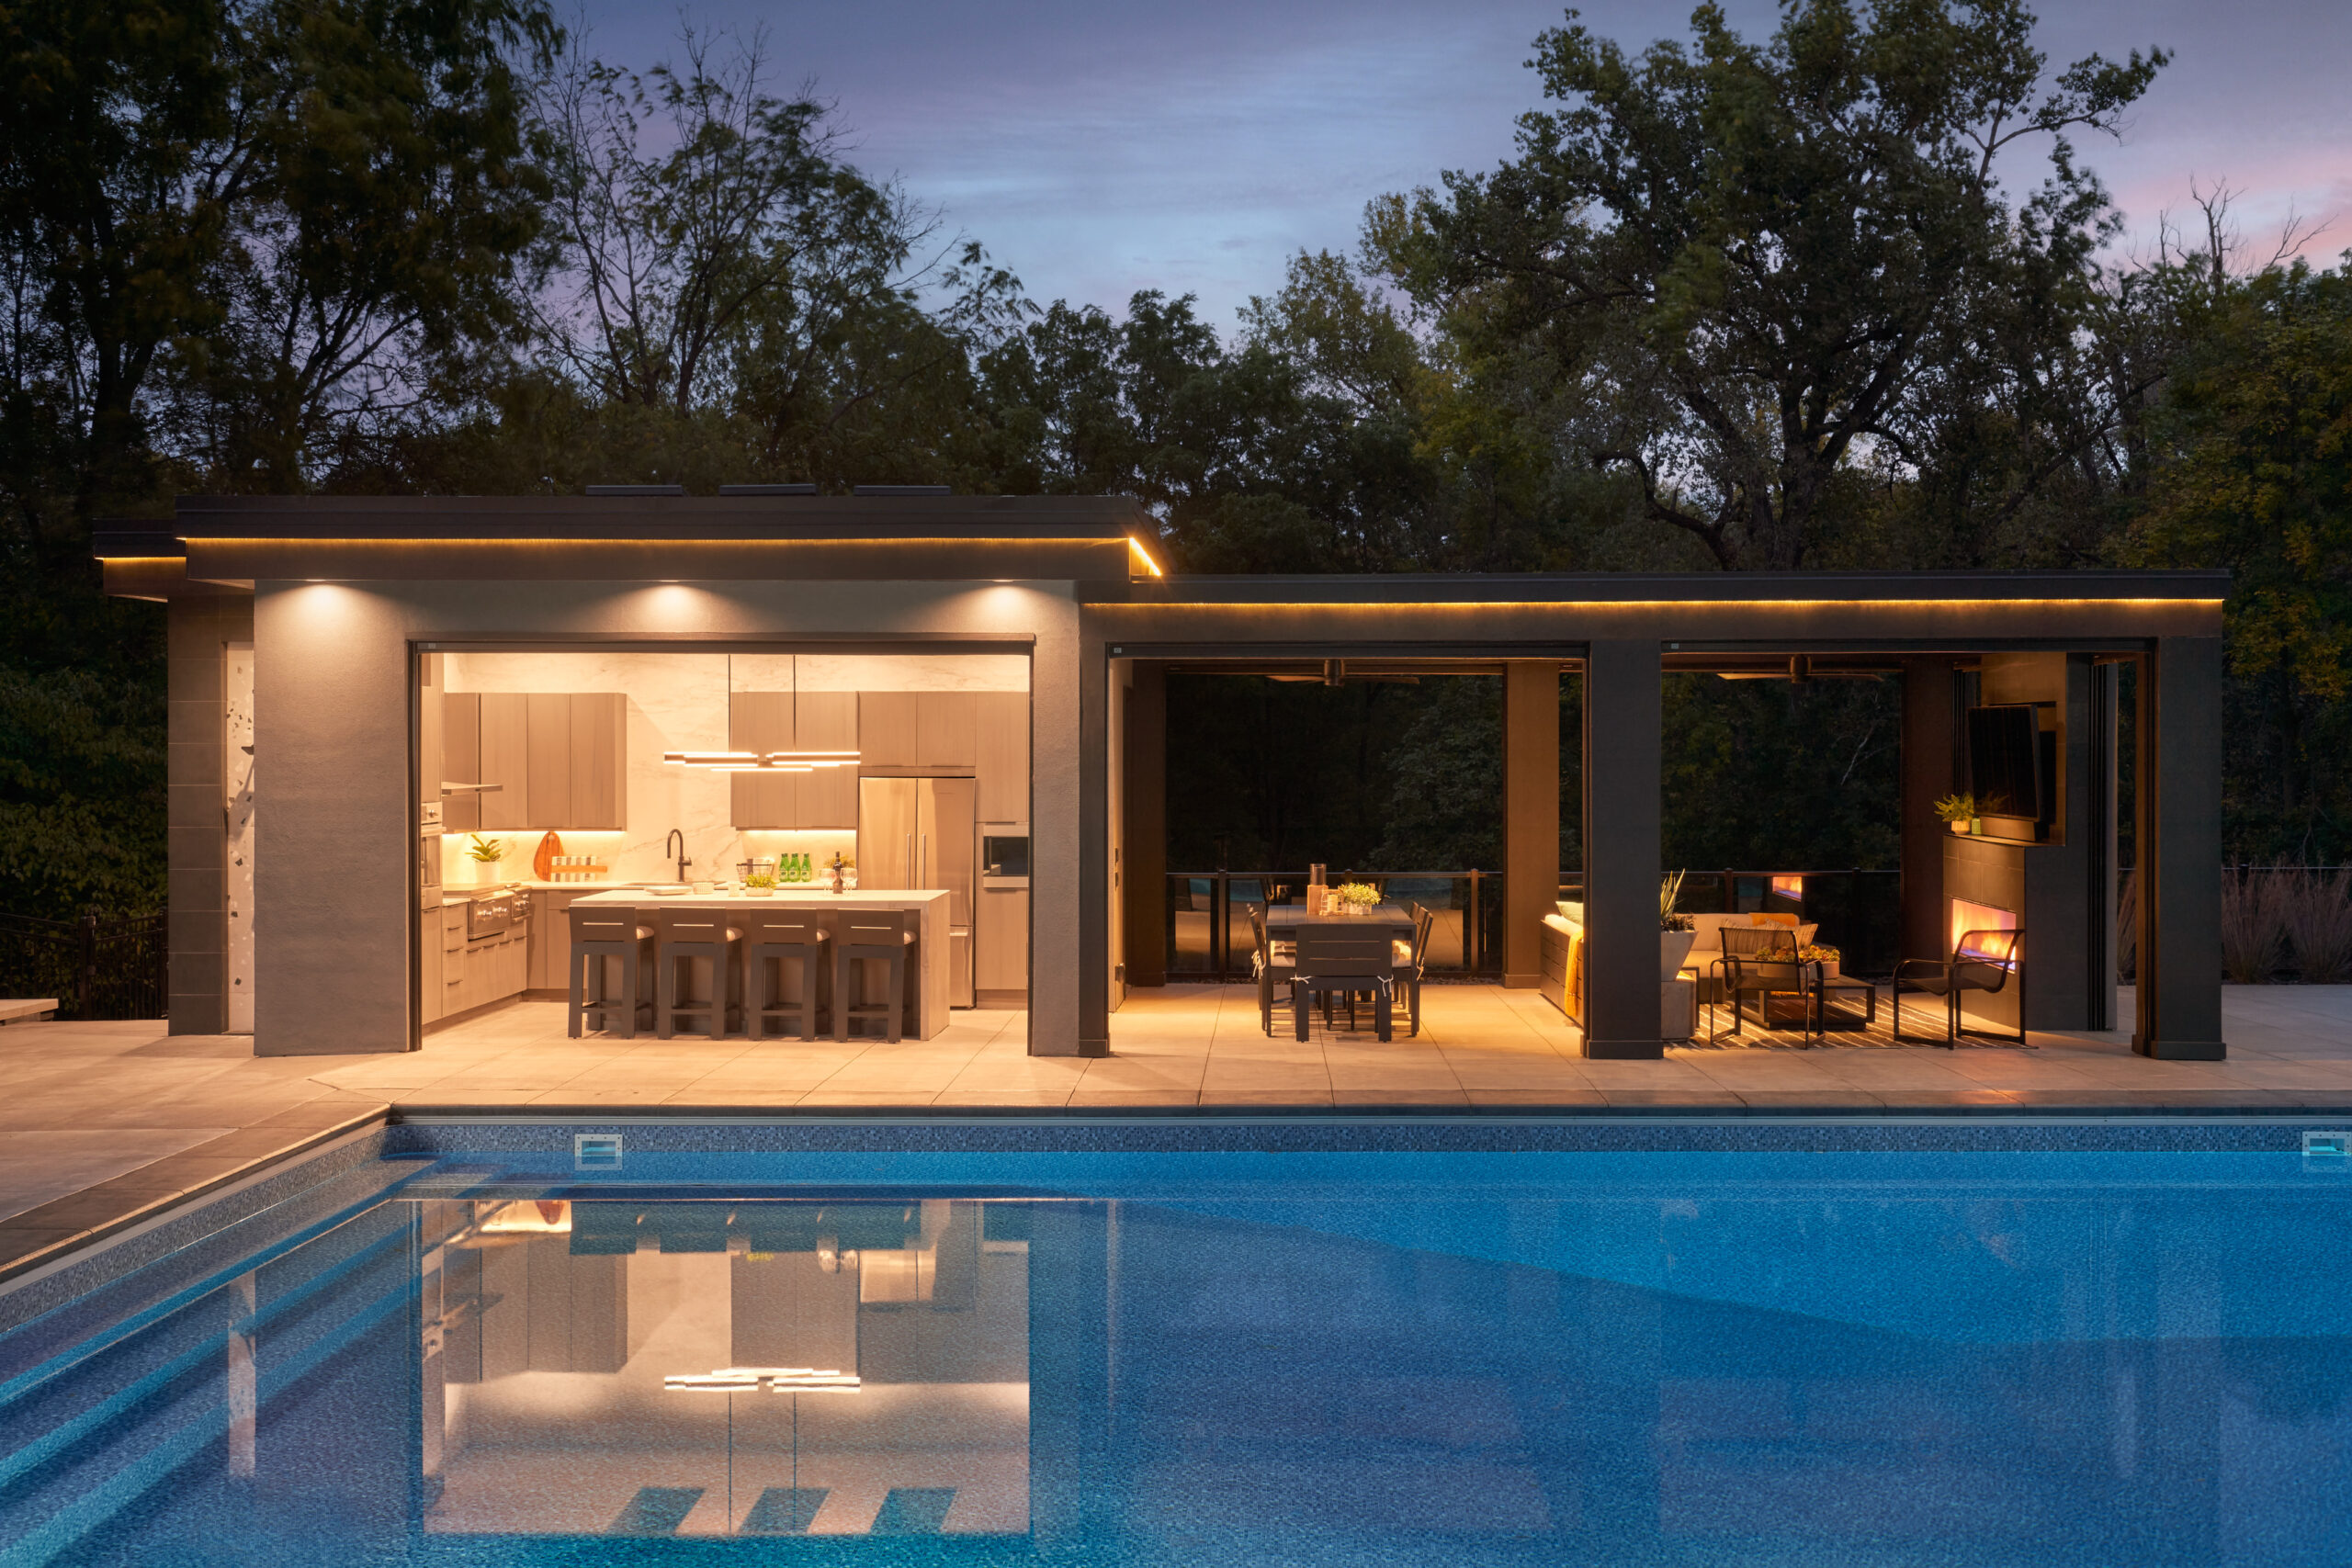 Outdoor in-ground pool with contemporary pool house featuring a bar/kitchen area and sitting area. Night shot.